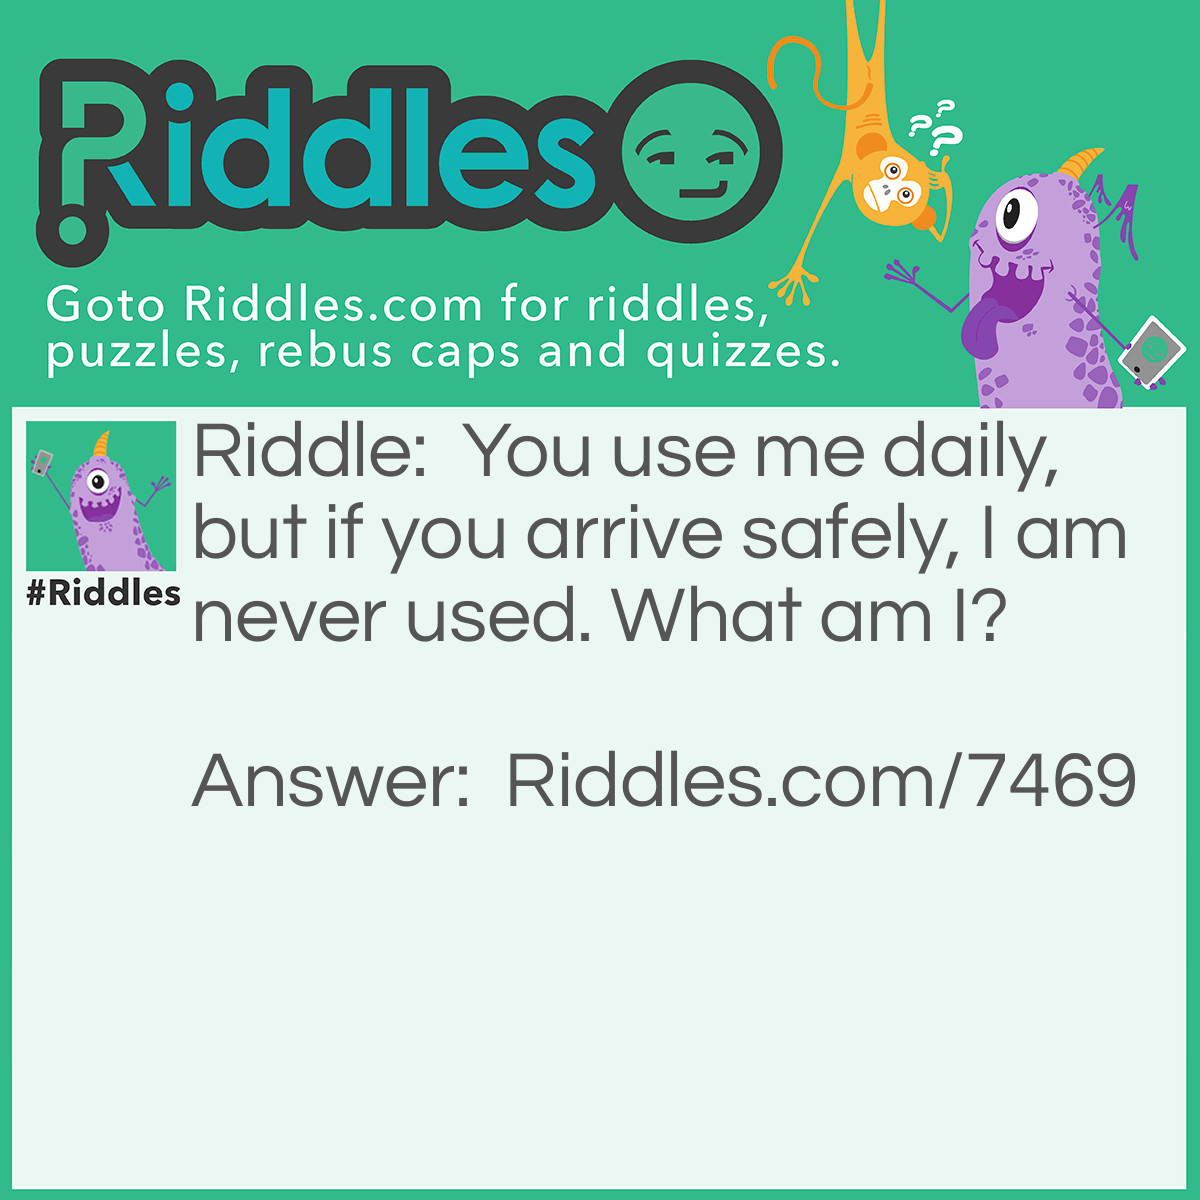 Riddle: You use me daily, but if you arrive safely, I am never used. What am I? Answer: Seat belt.